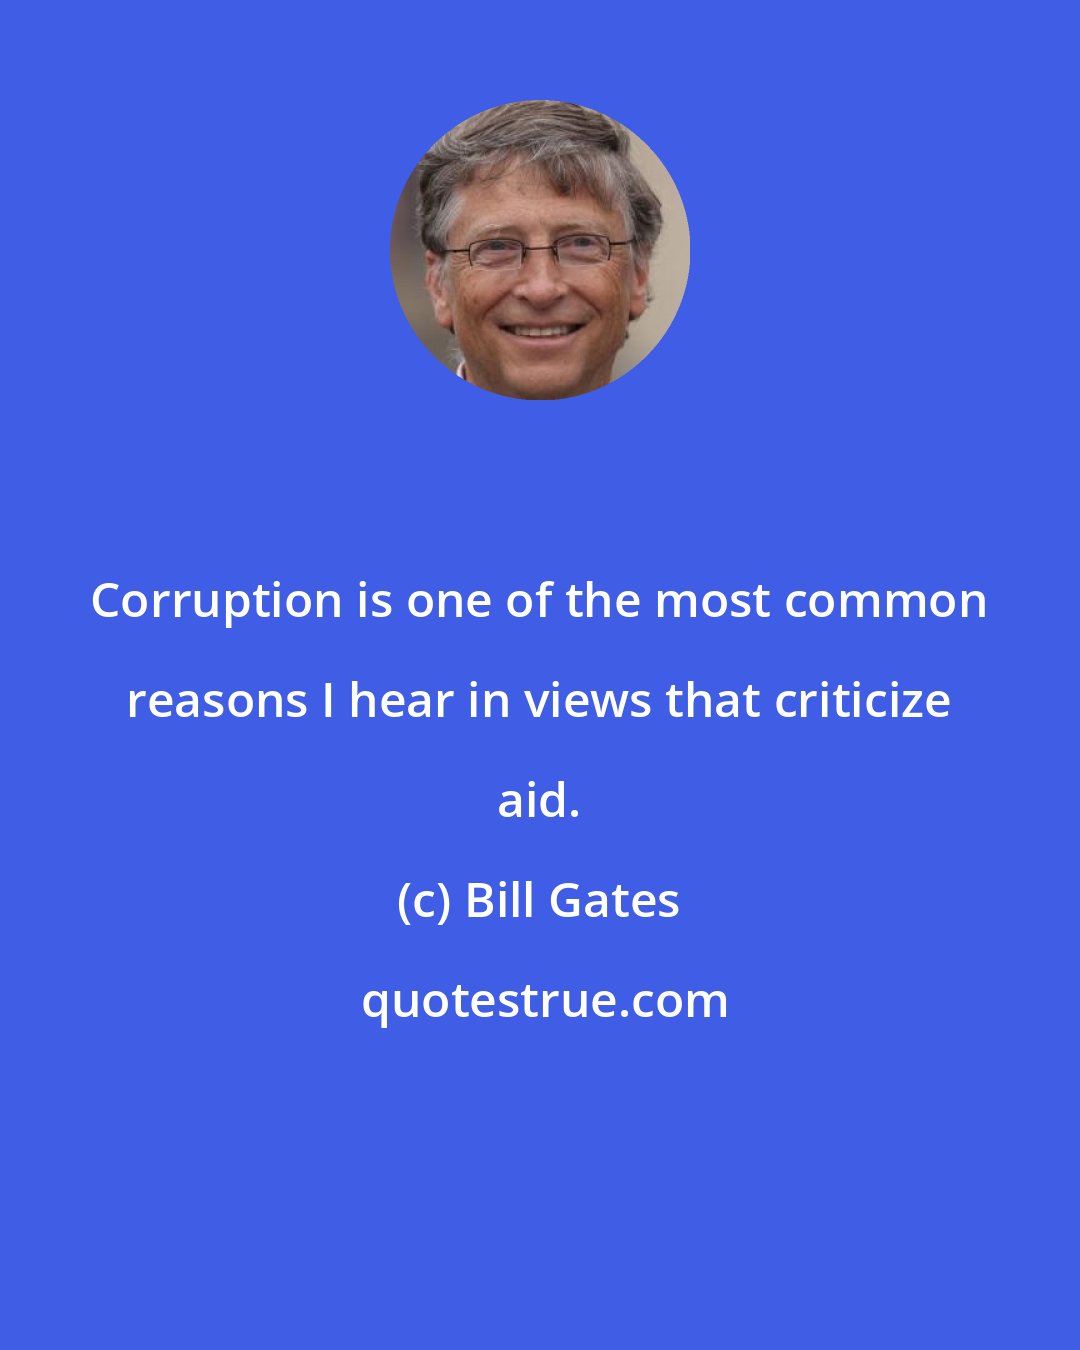 Bill Gates: Corruption is one of the most common reasons I hear in views that criticize aid.